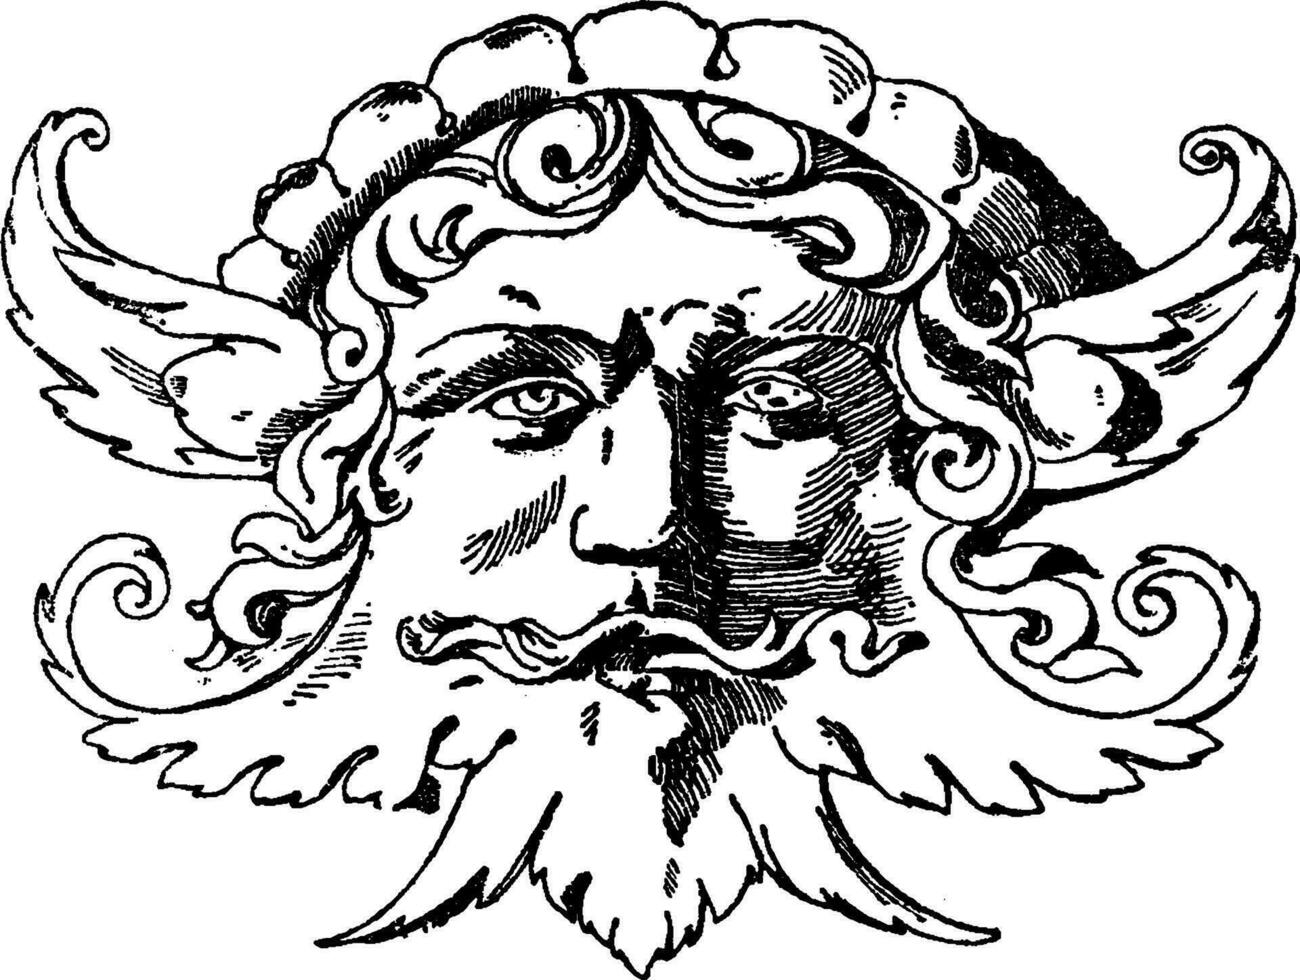 Grotesque Mask was designed during the Italian Renaissance by Sansovino, vintage engraving. vector